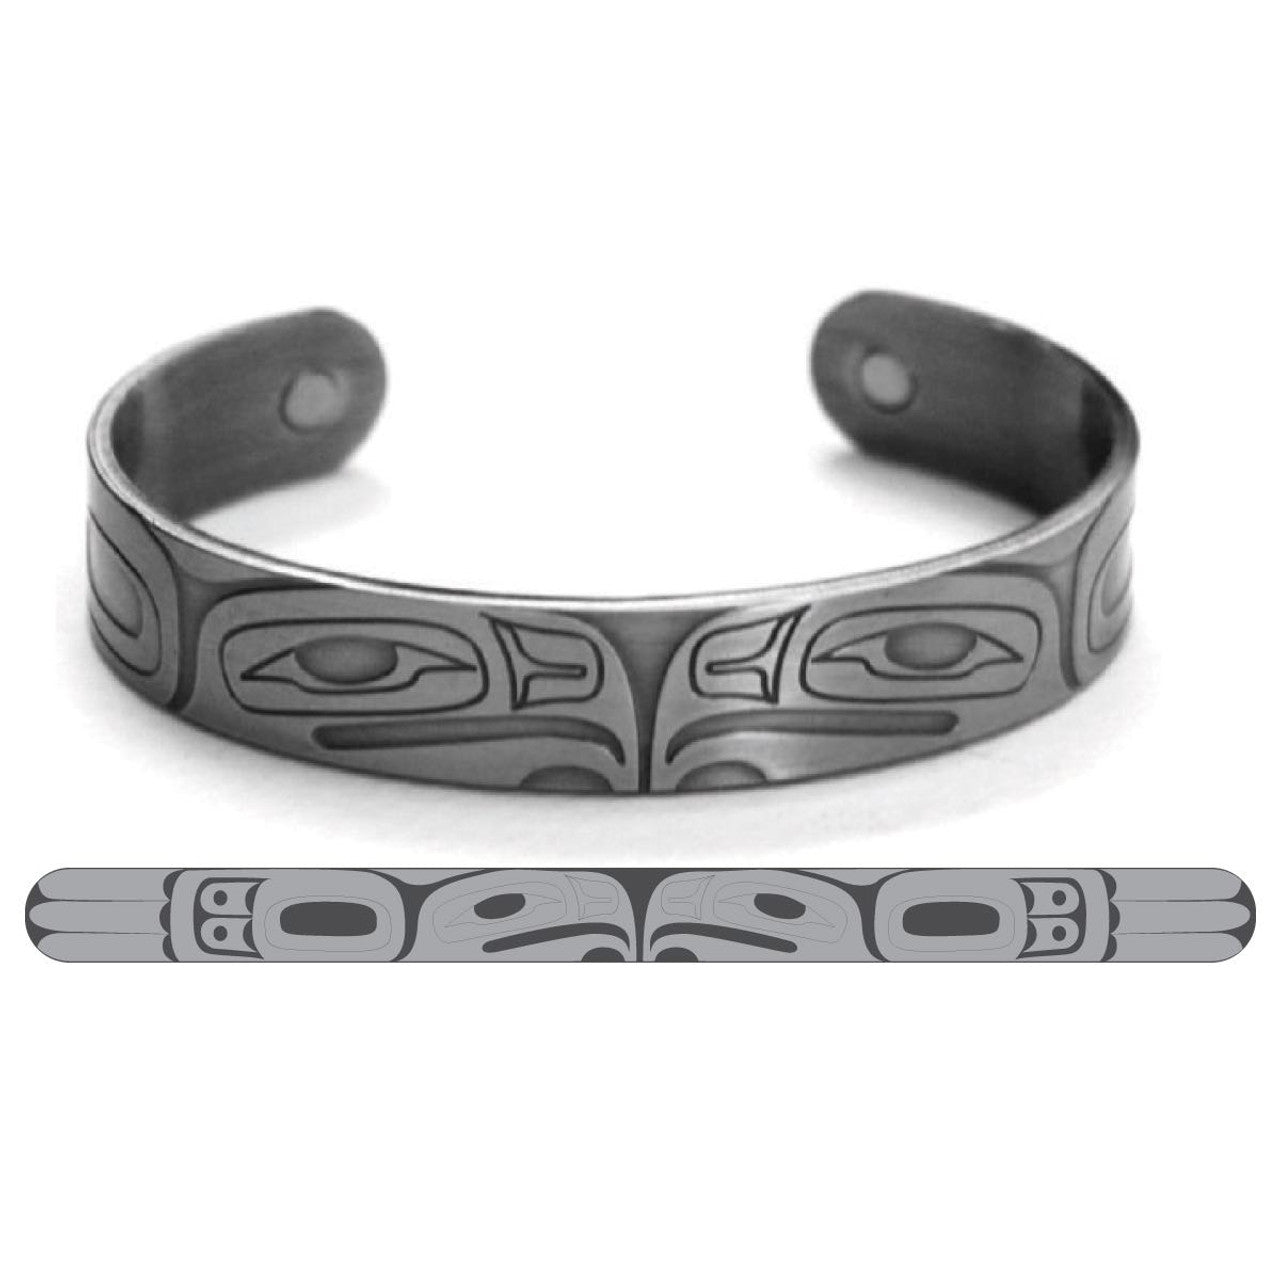 BRUSHED SILVER BRACELETS - Eagle - Abr7 - House of Himwitsa Native Art Gallery and Gifts